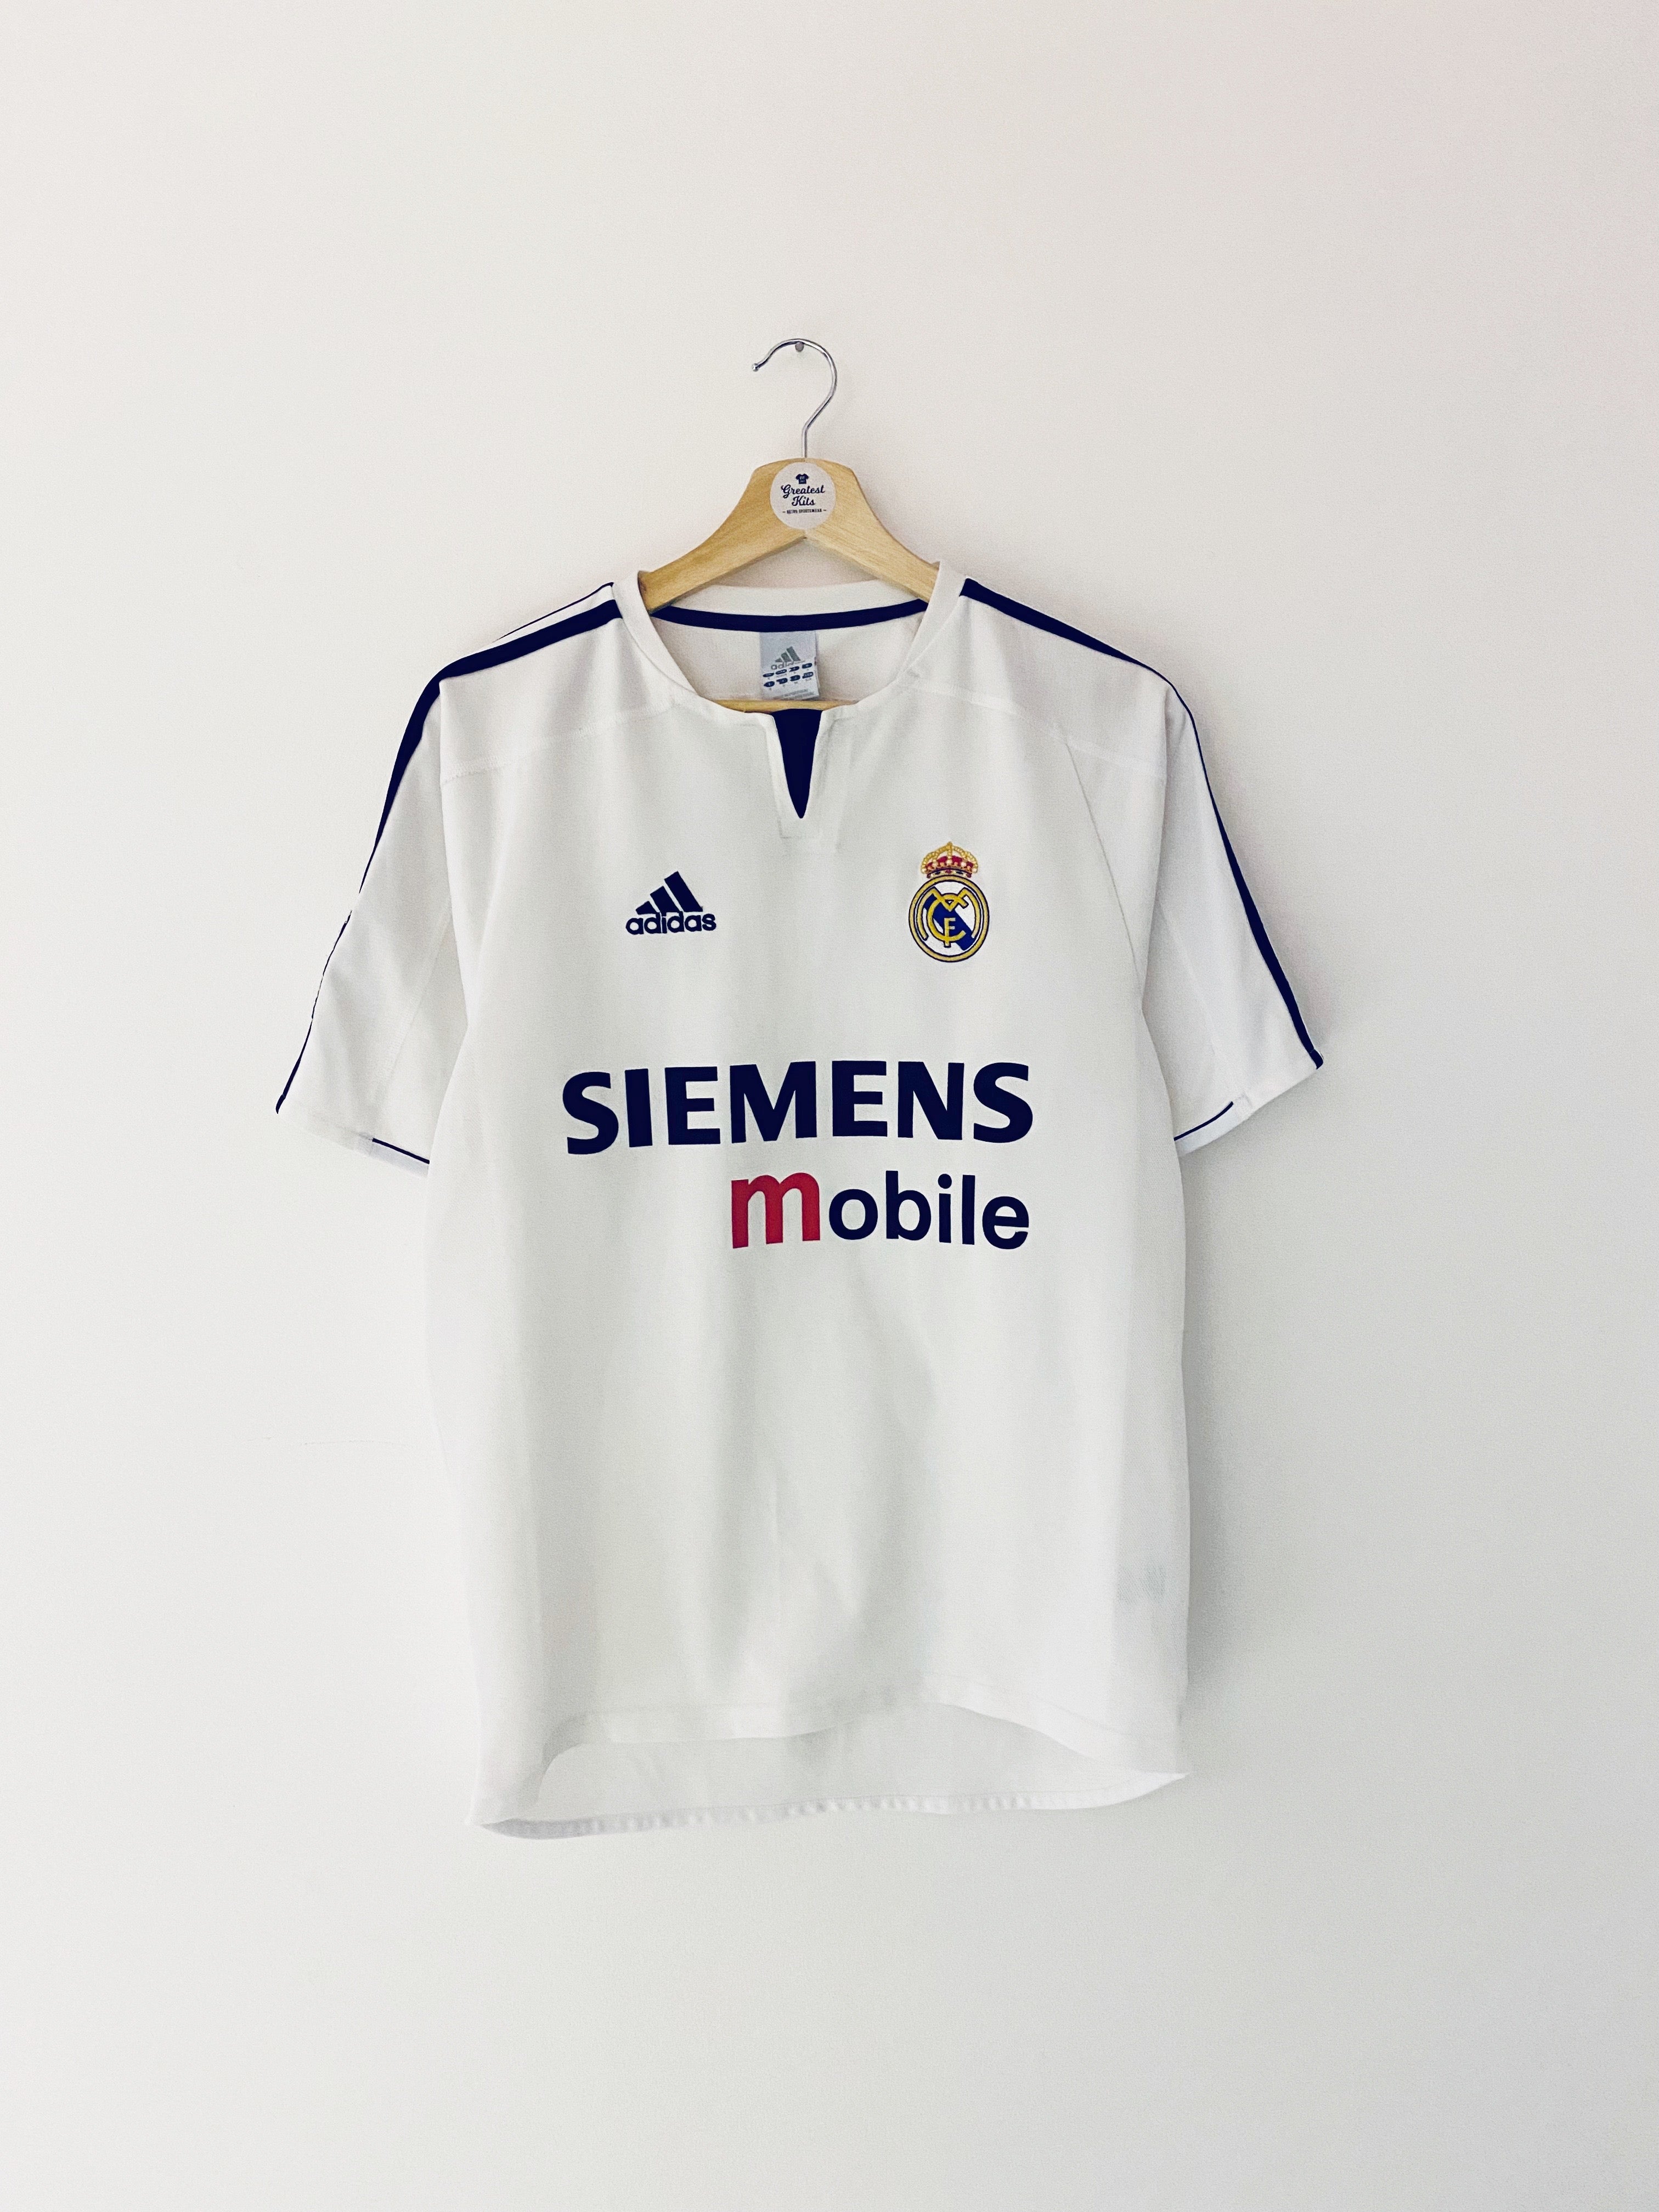 2003 real madrid jersey